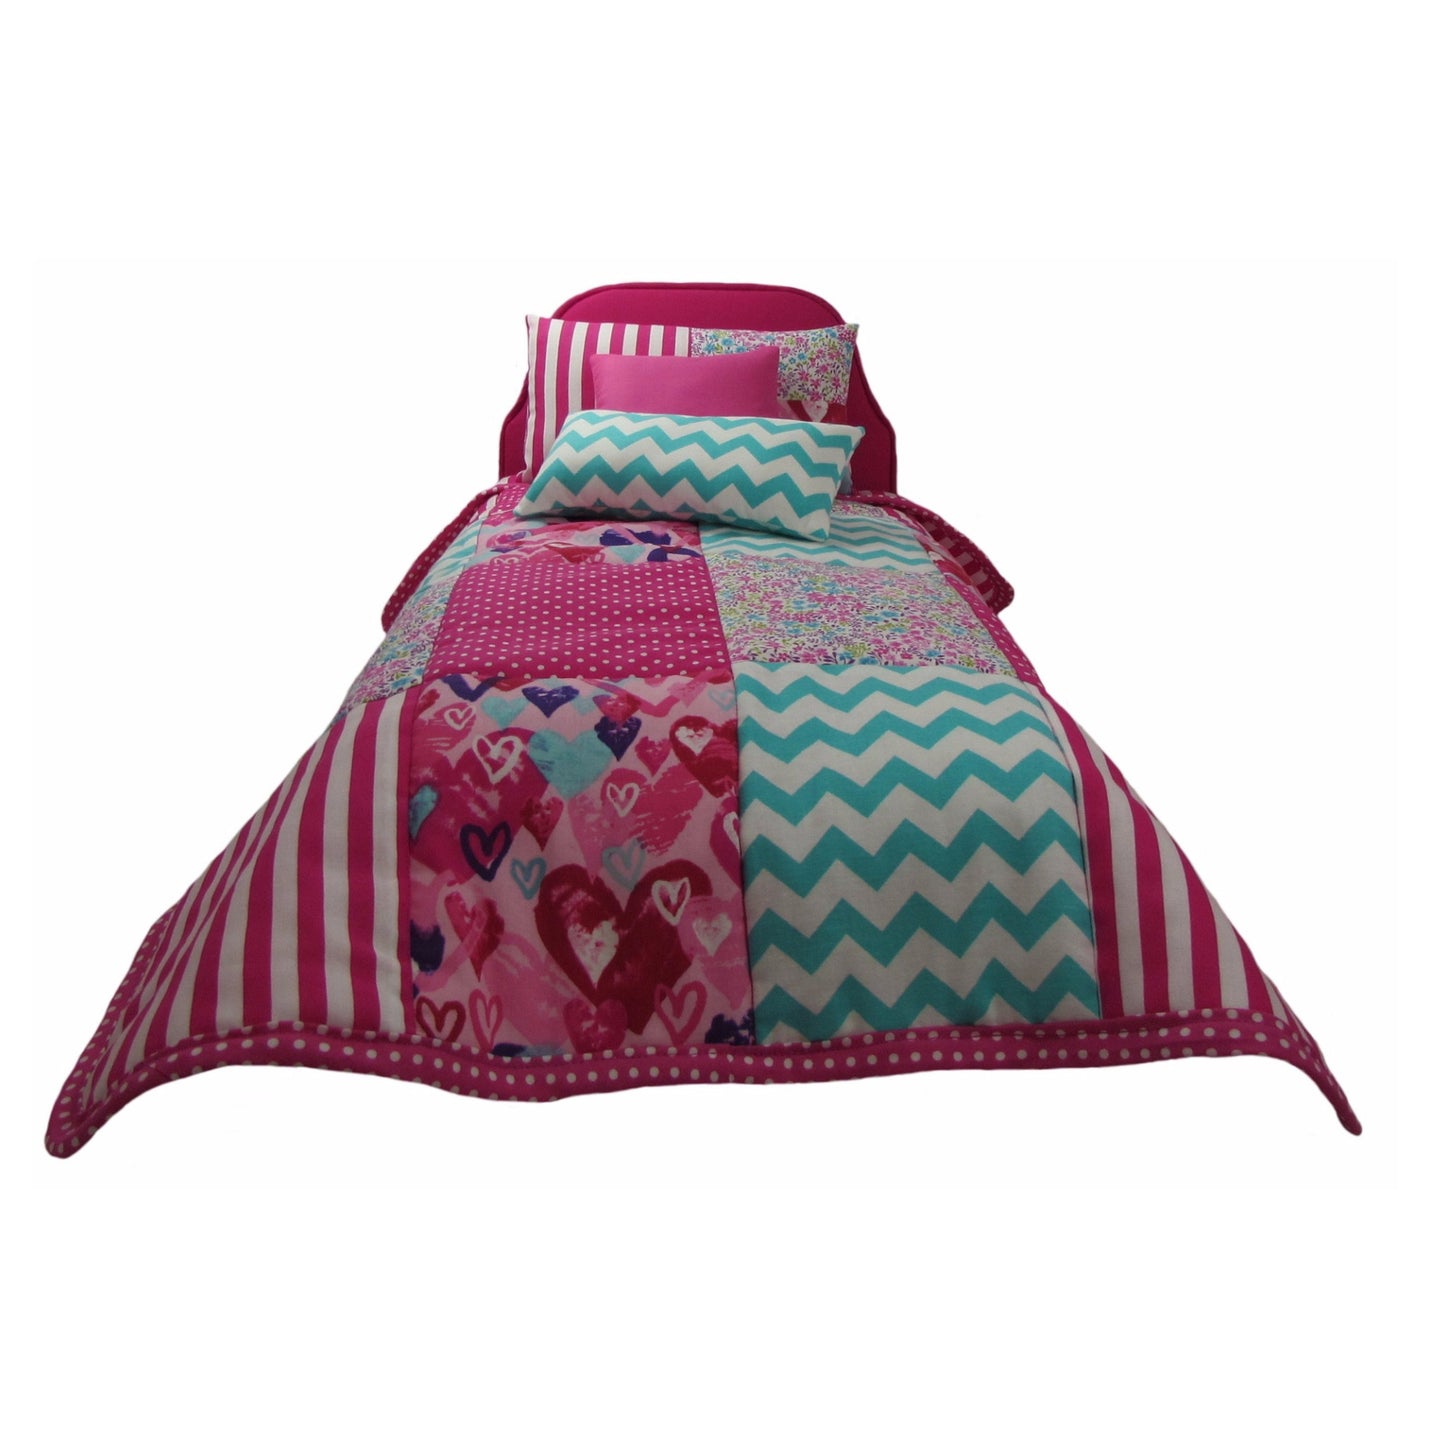 Stripes, Dots, and Floral Doll Quilt on Bright Pink Upholstered Doll Bed for 18-inch dolls